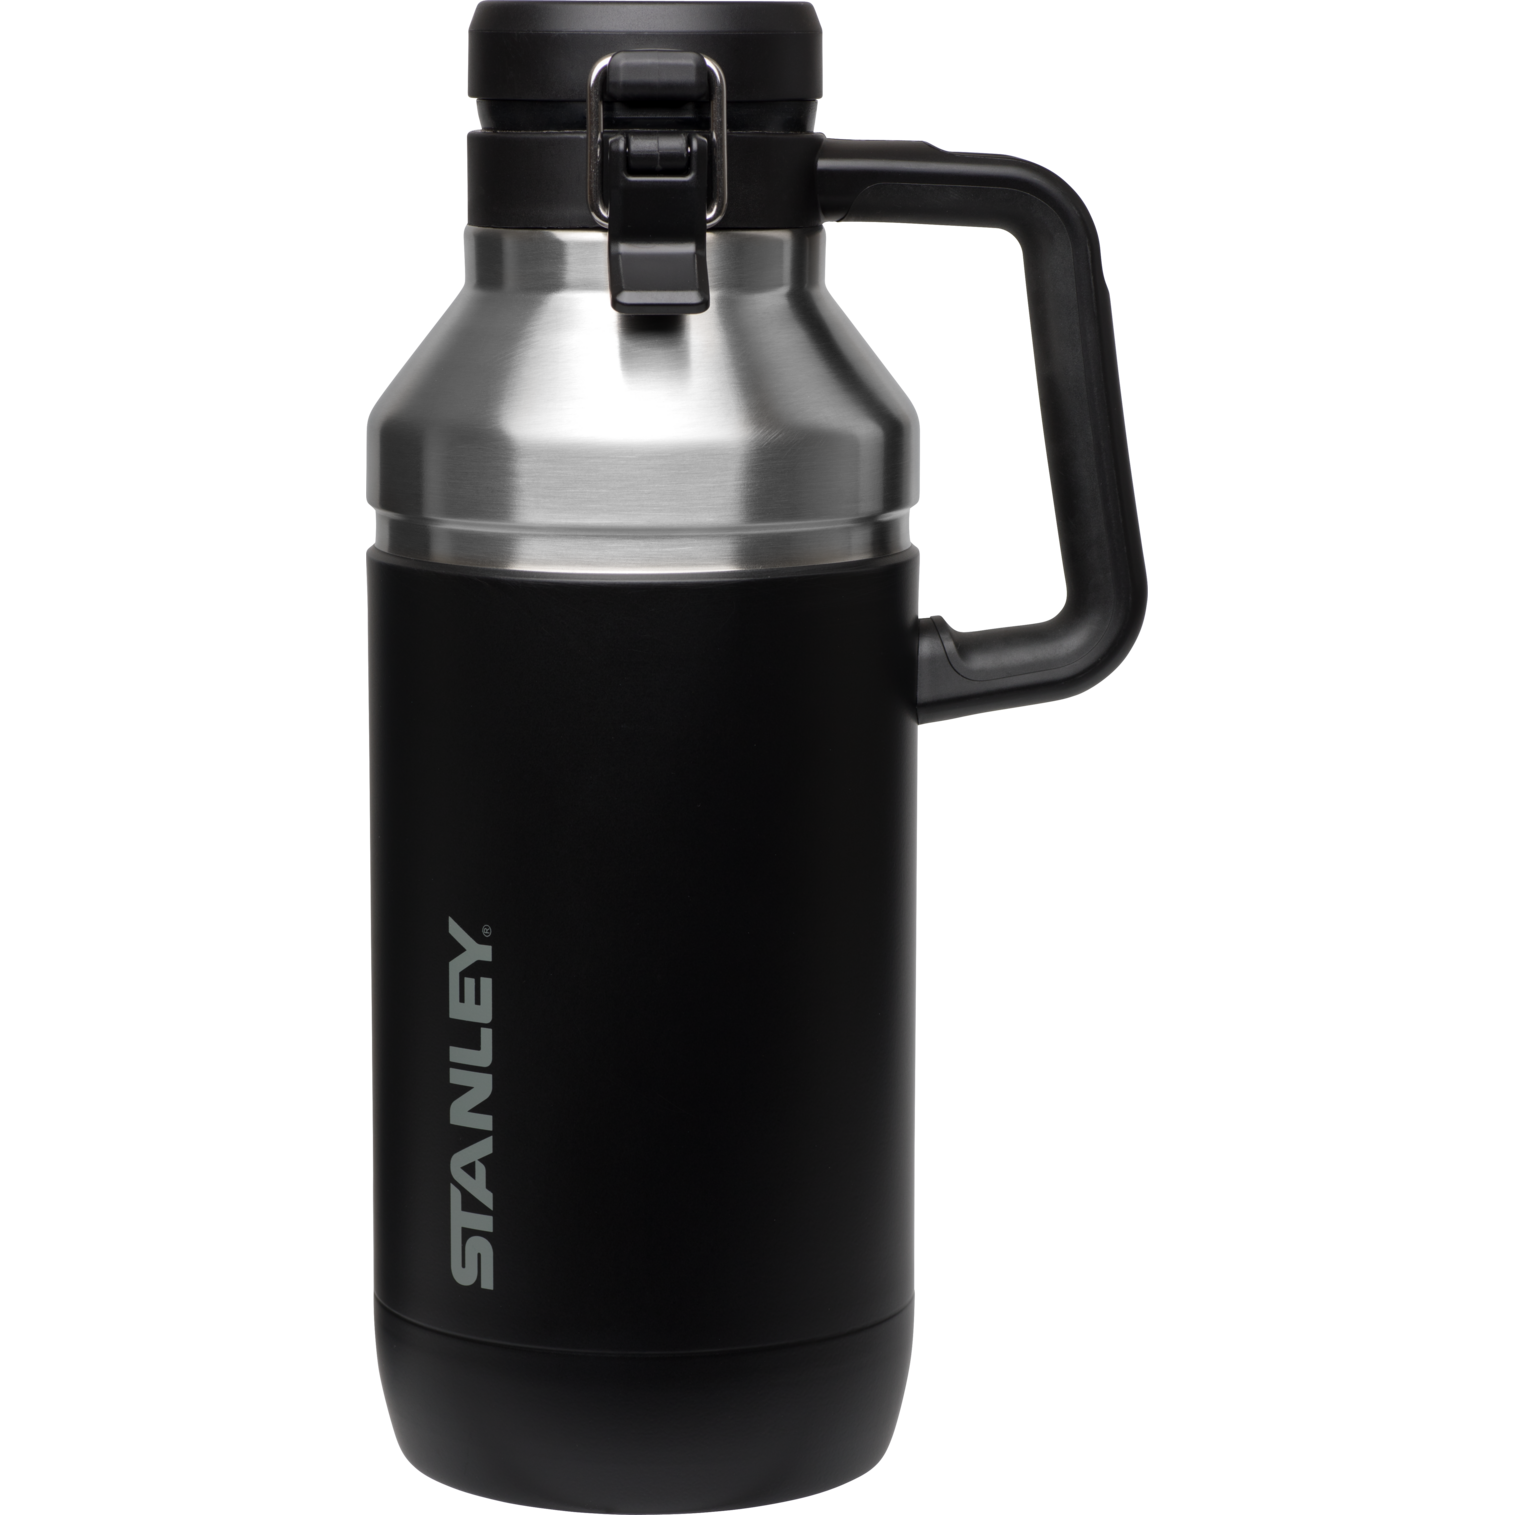 Stanley Classic Easy-Pour Growler 64 OZ - Utah Whitewater Gear